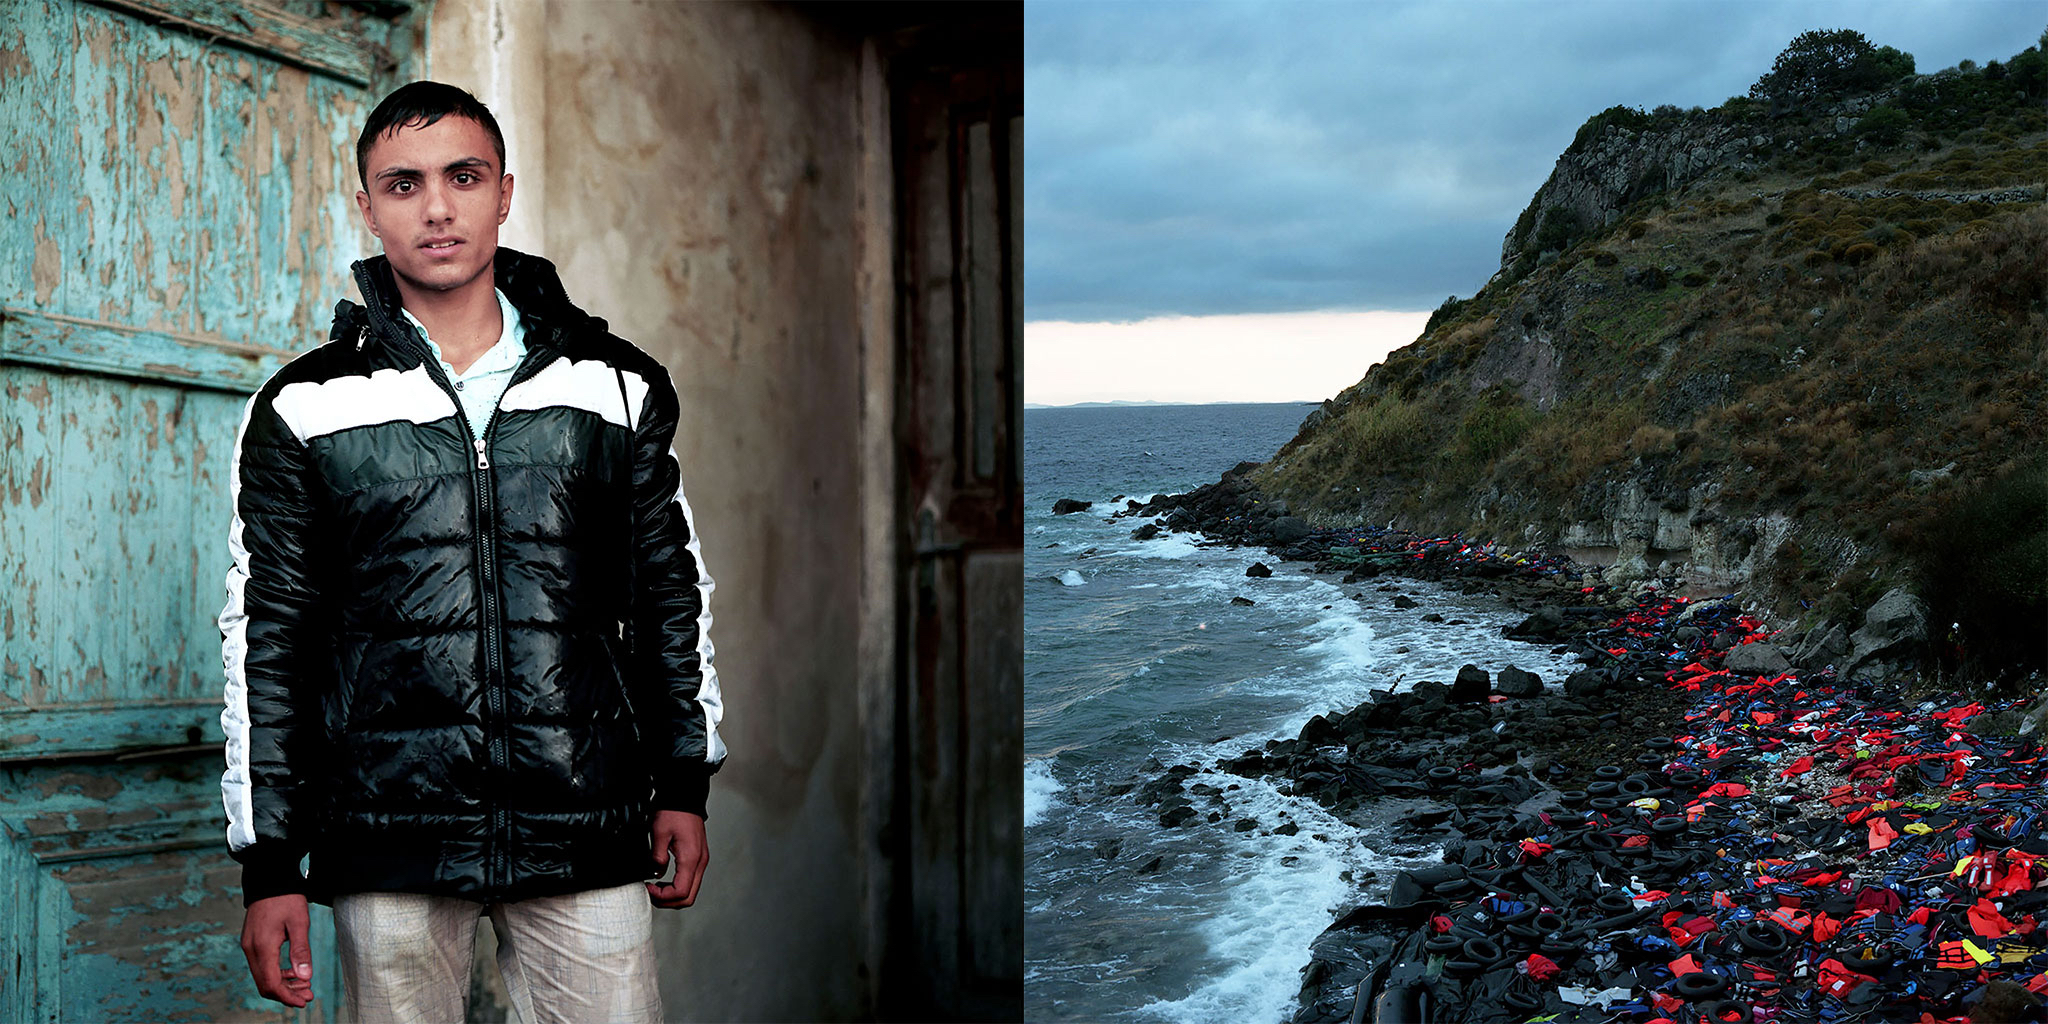 A portrait of a teenage boy in dripping wet clothes is on the left, and a scene of the coast of Lésvos, Greece scattered with life jackets is on the right,